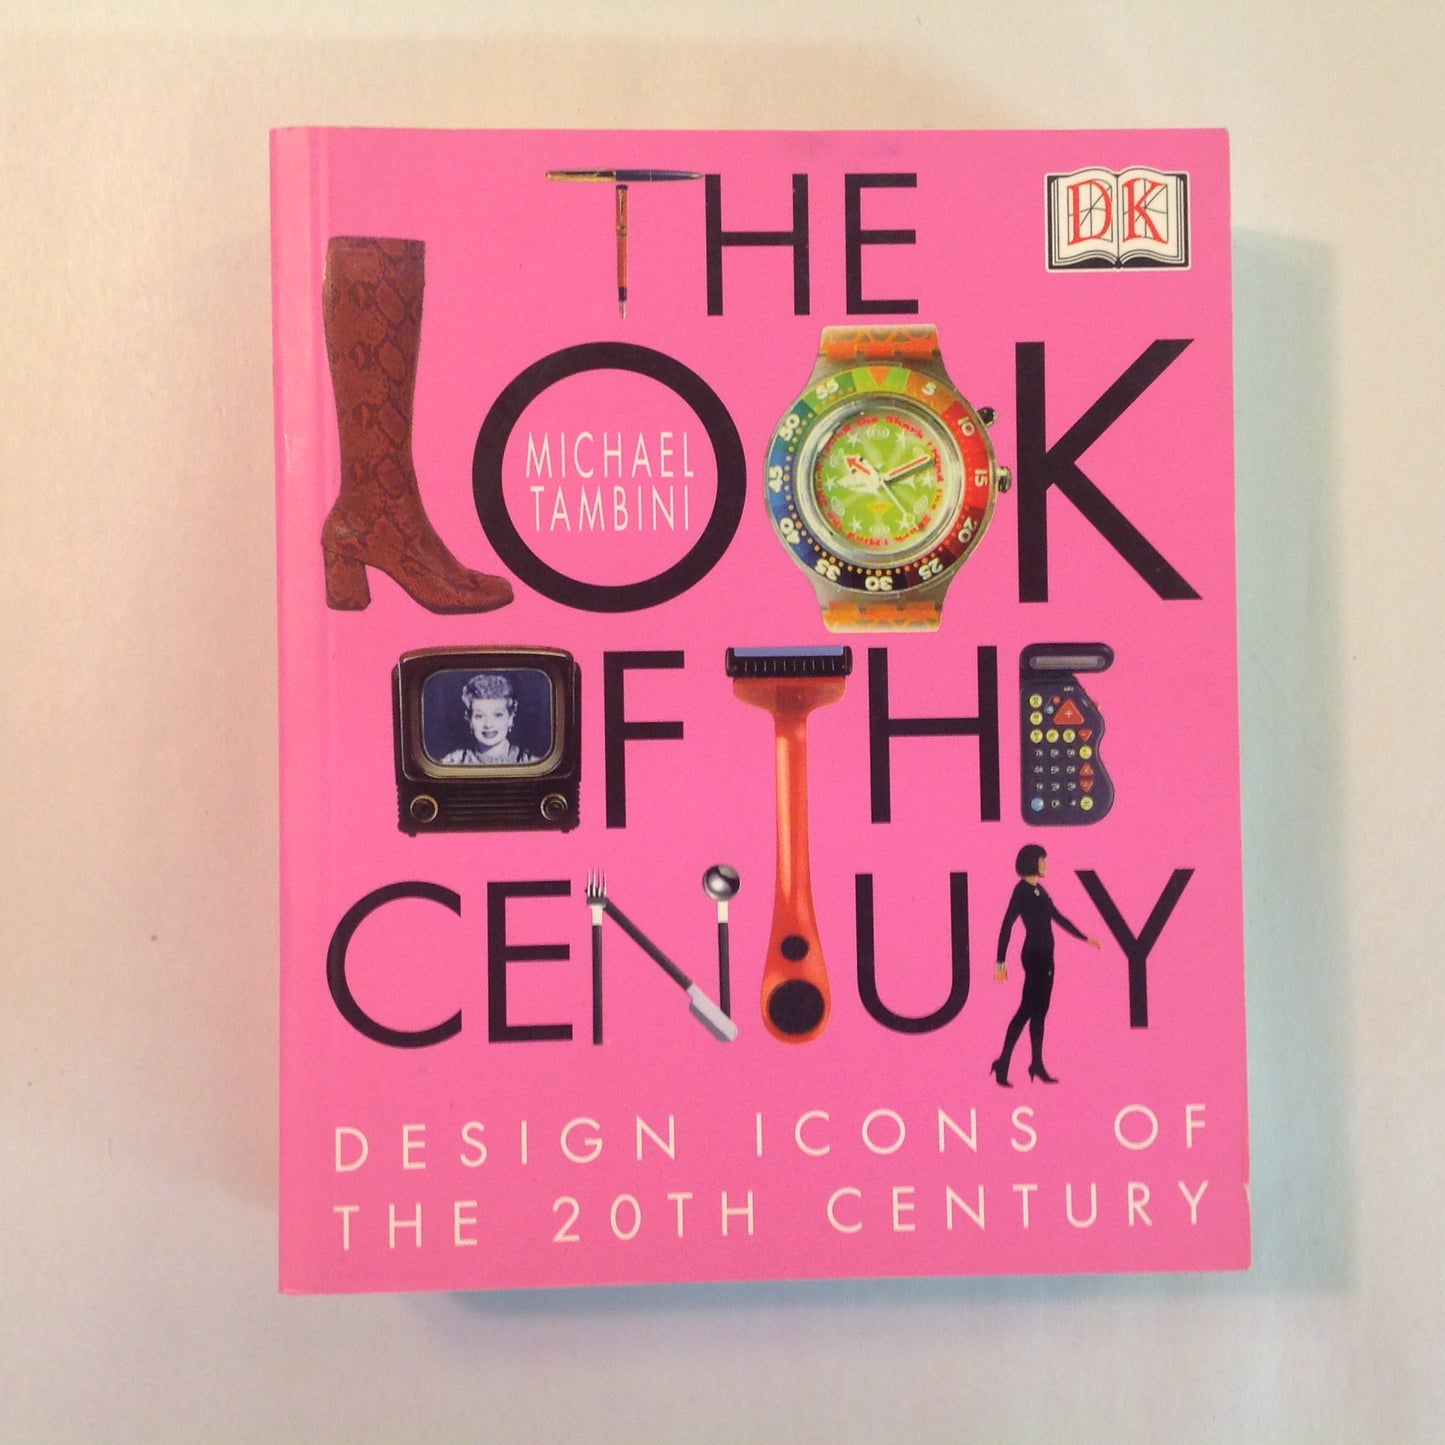 Vintage 1999 Trade Paperback The Look of the Century: Design Icons of the 20th Century Michael Tambini DK